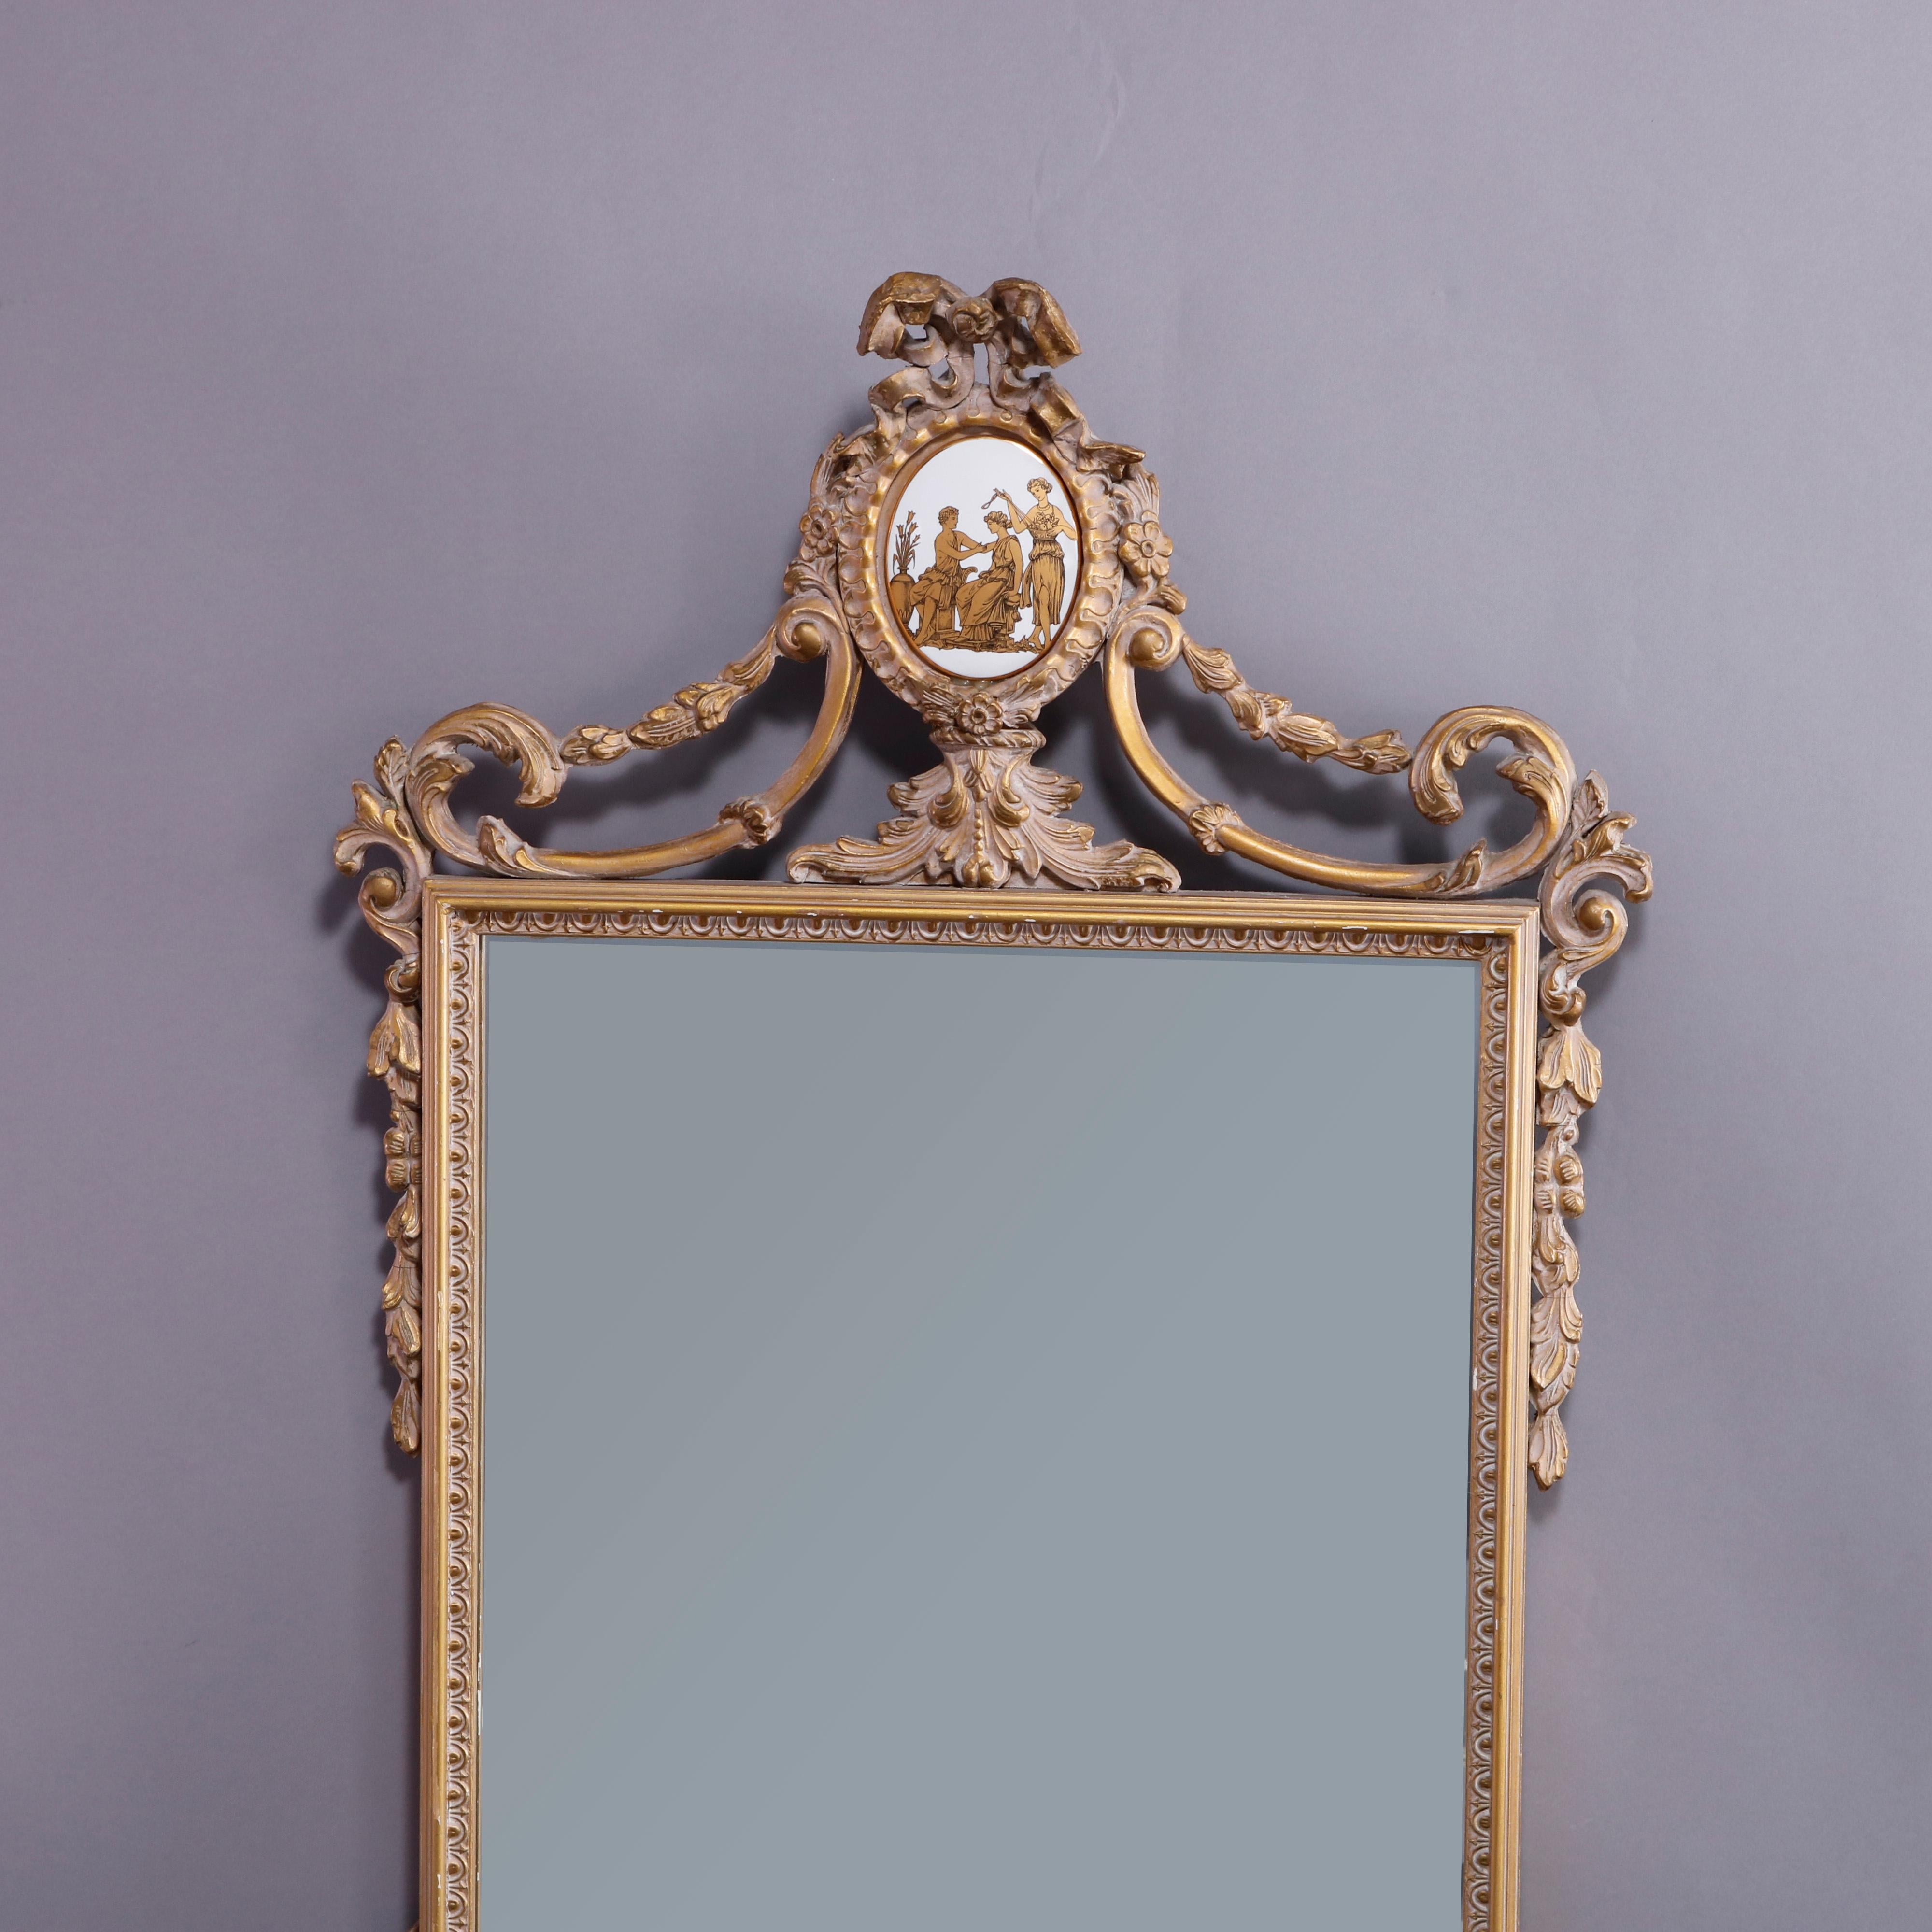 An antique and large French Neoclassical wall mirror offers gilt composition frame with medallion crest having porcelain insert with Classical scene, ribbon and bow surround over mirror with foliate frame, 20th century

Measures: 48.5